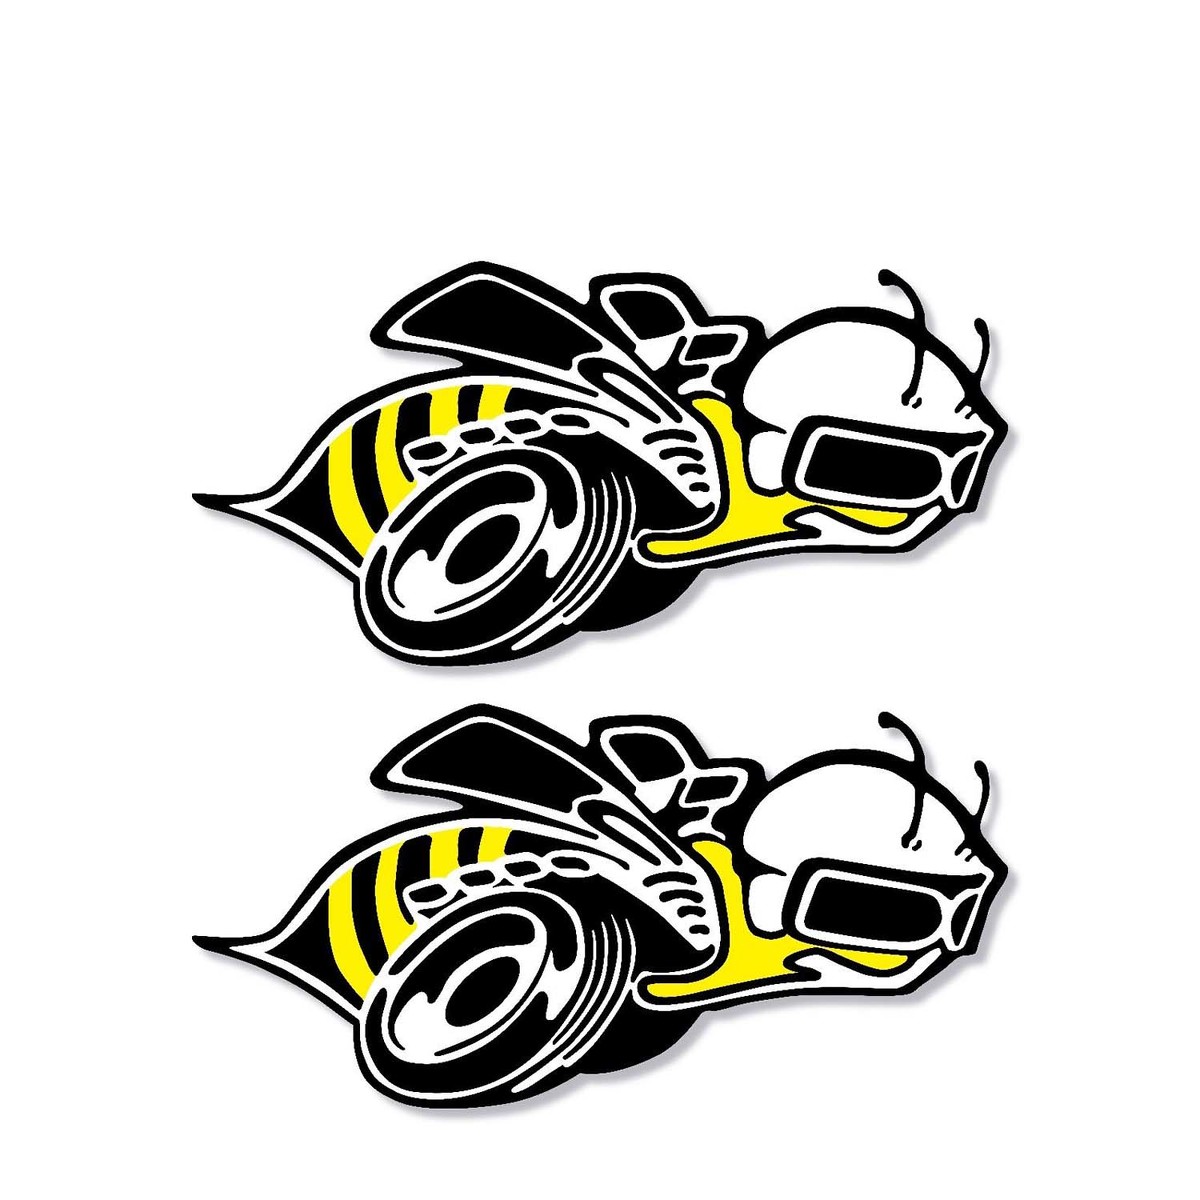 Set of 2: Dodge Super Bee vinyl decal full color over laminated for car & trucks